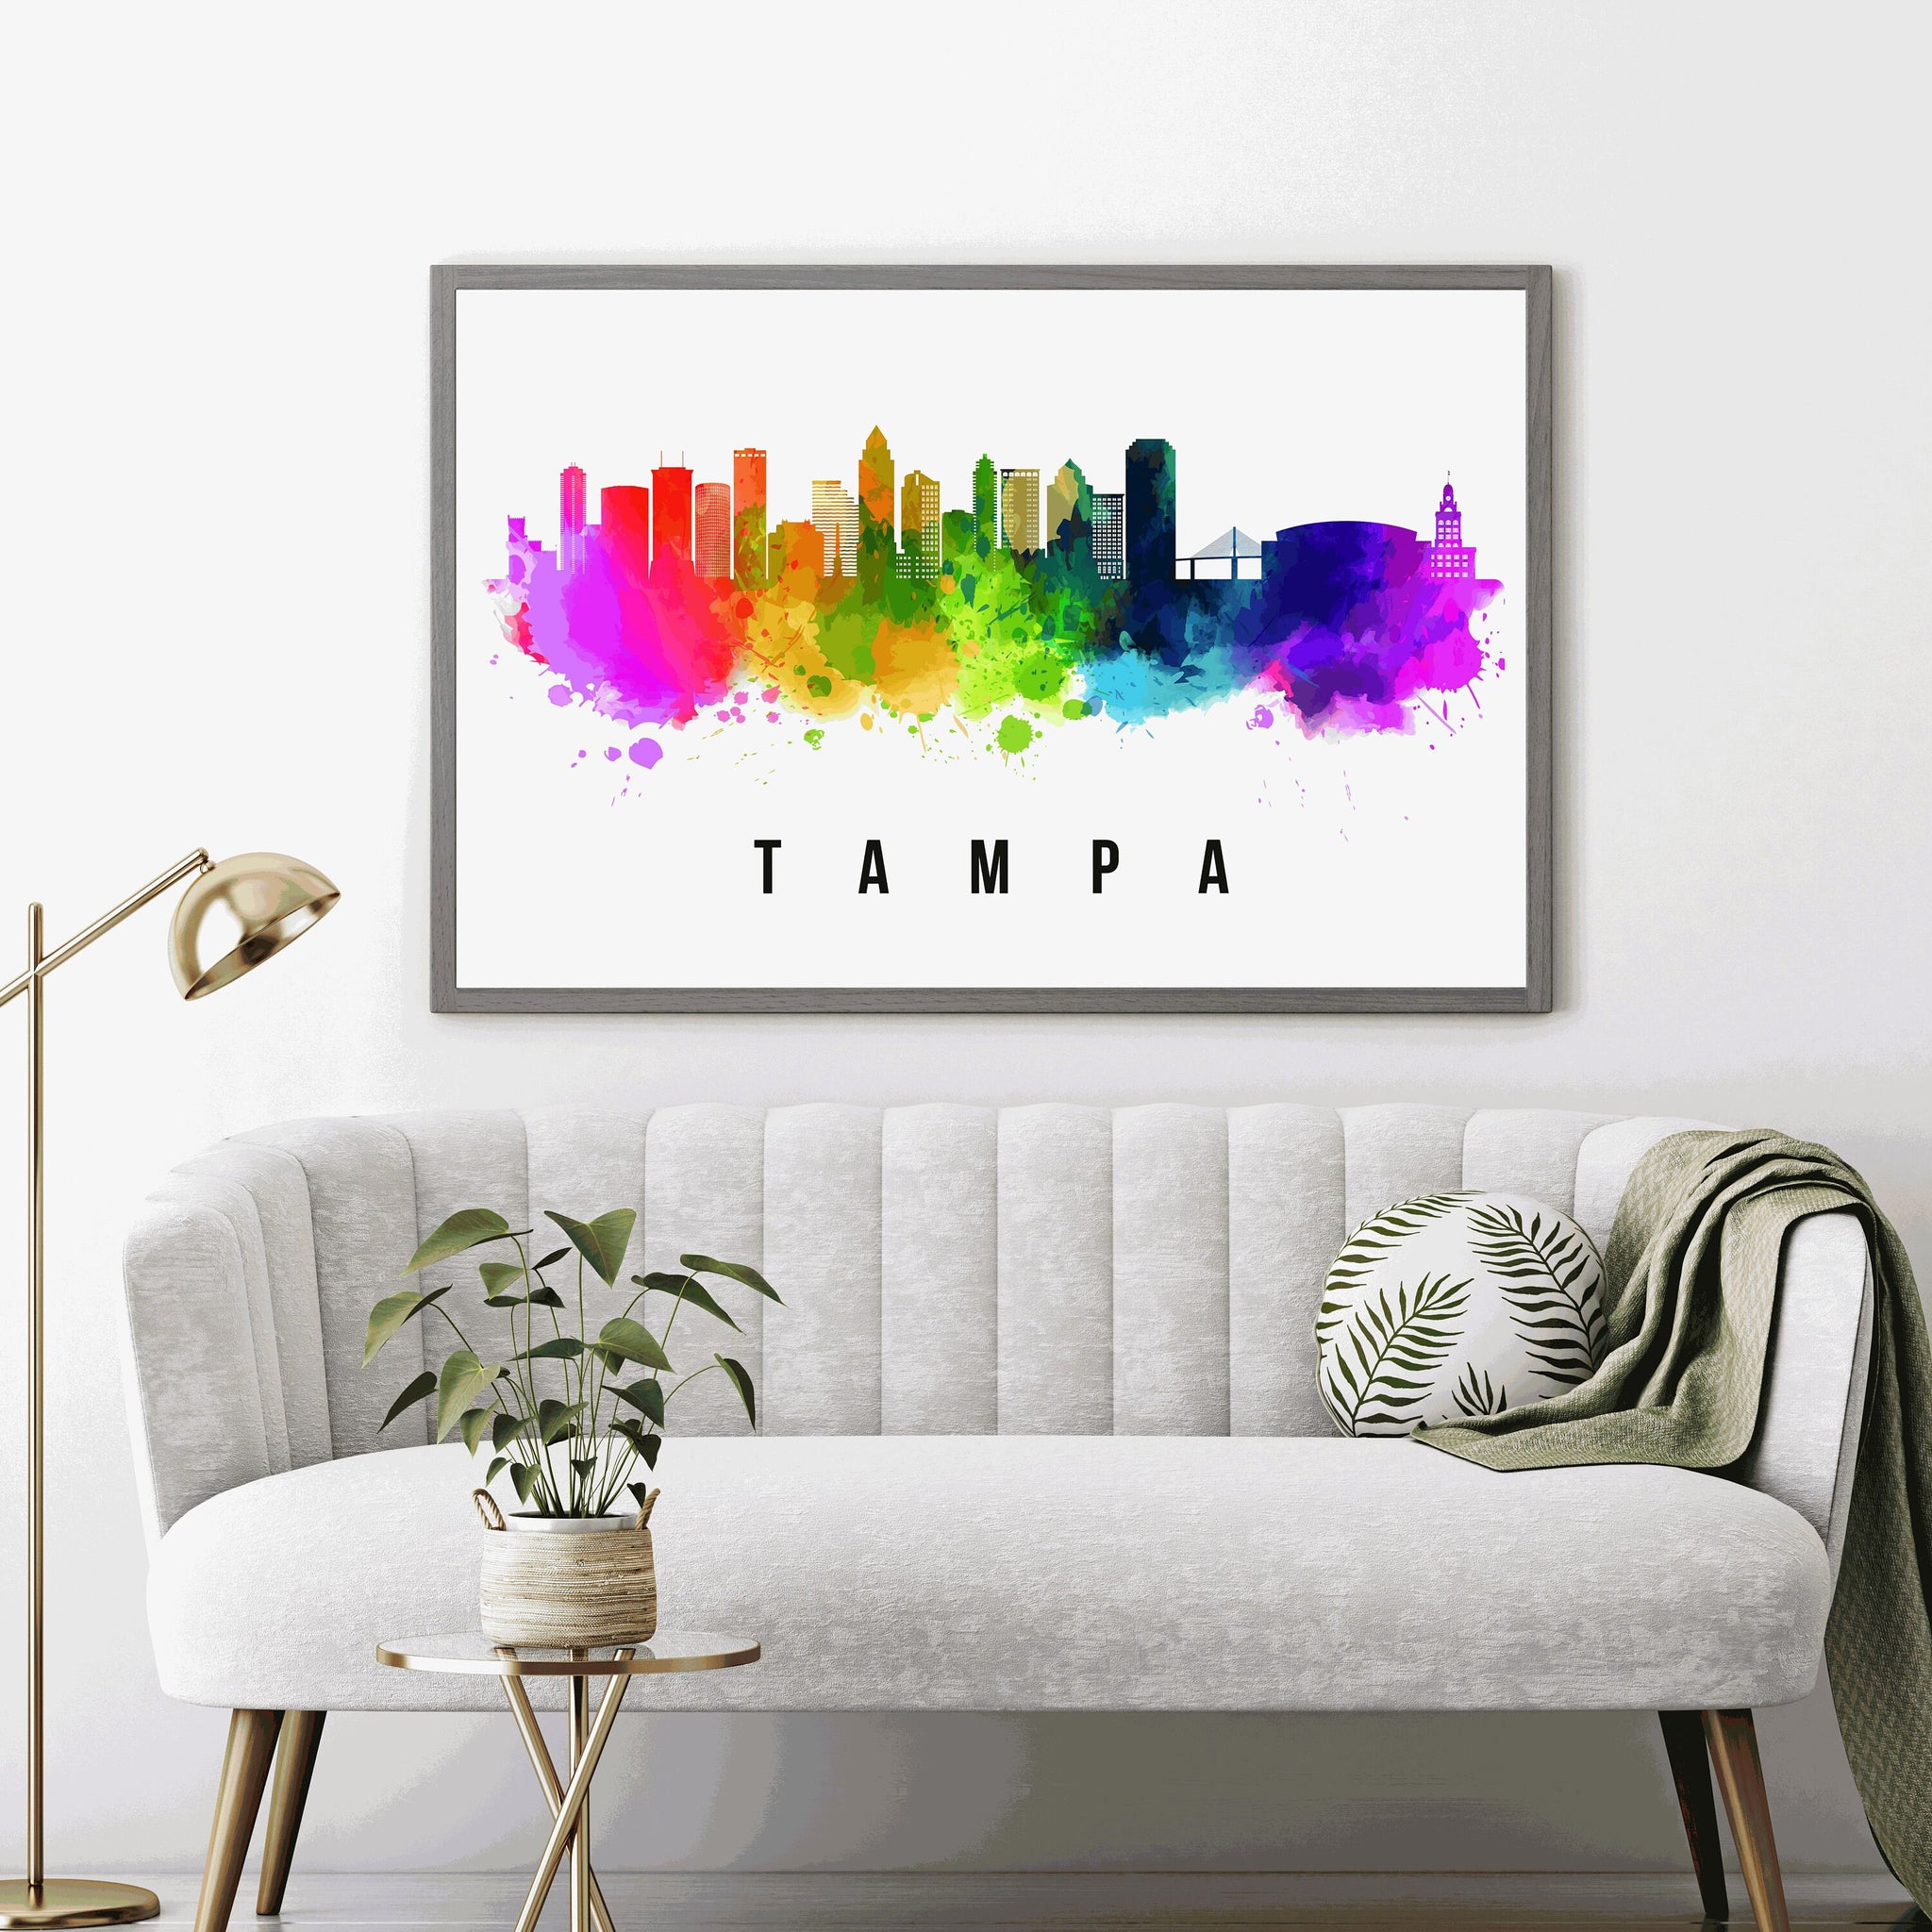 Tampa Florida skyline poster, Tampa Florida Cityscape Print, Tampa Florida landmark poster, Florida cityscape print, Home office wall art